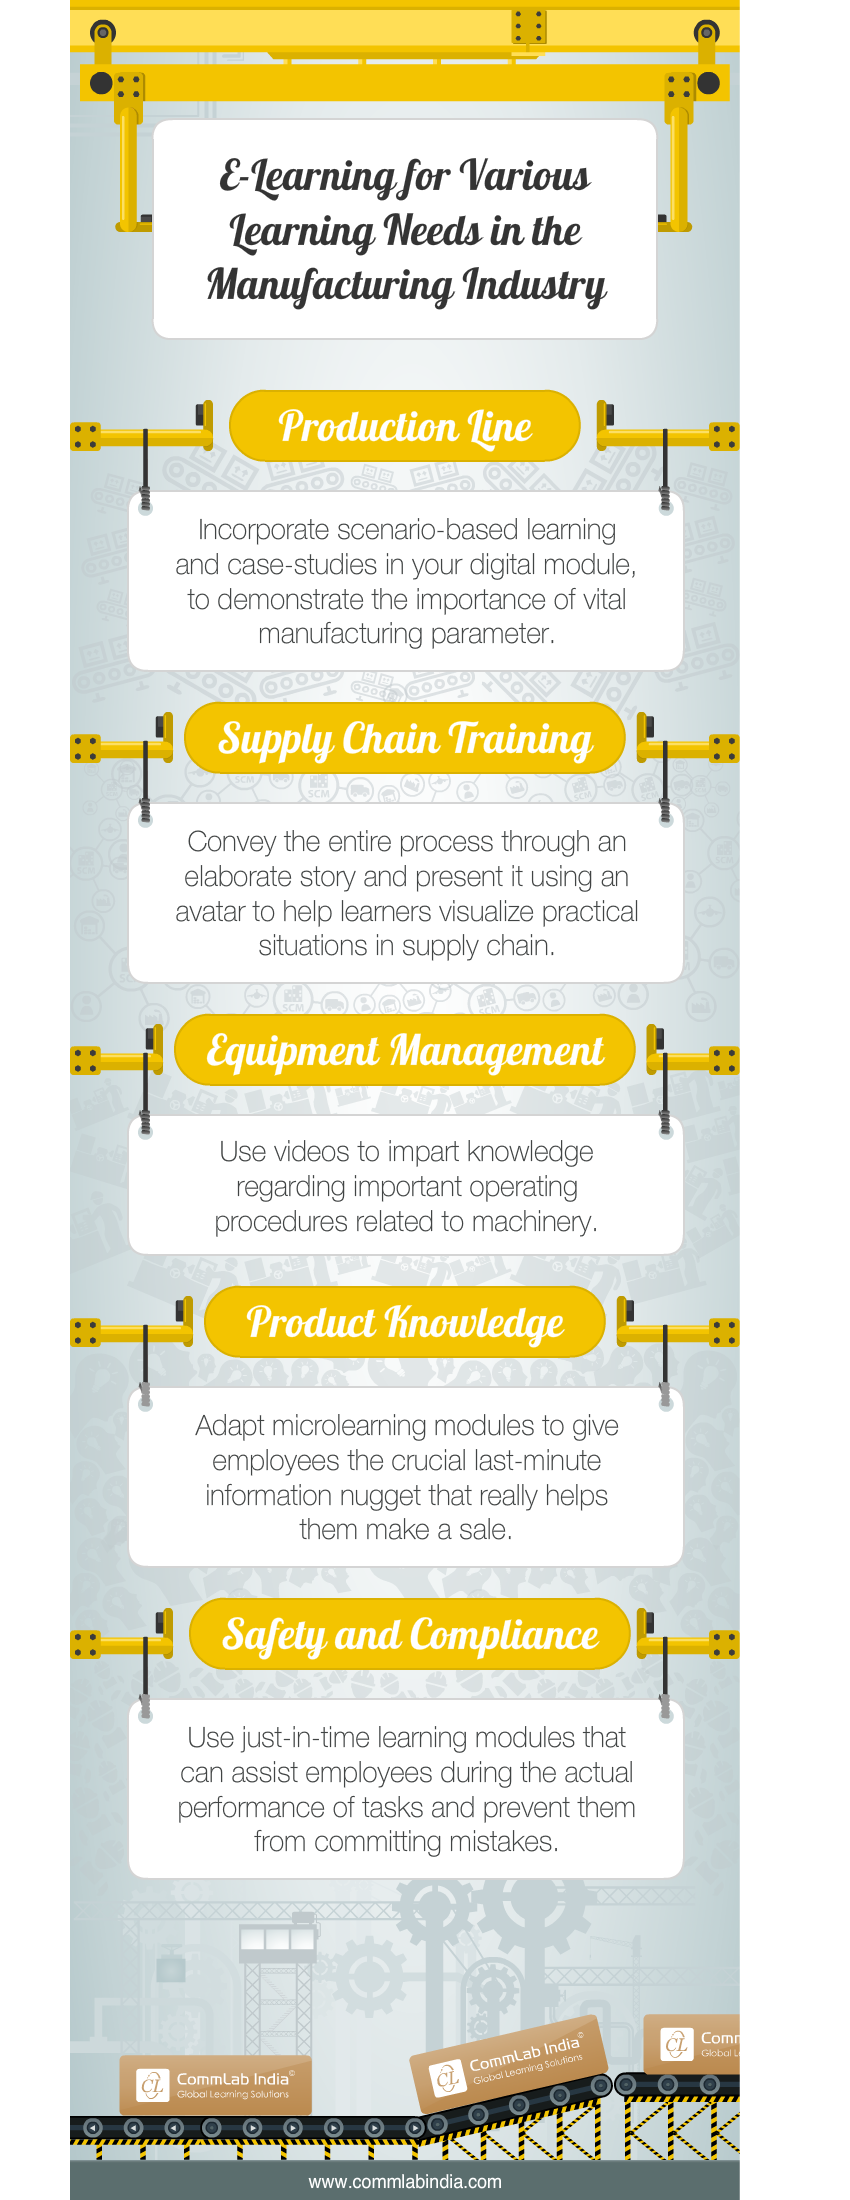 E-Learning for Various Learning Needs in the Manufacturing Industry [Infographic]